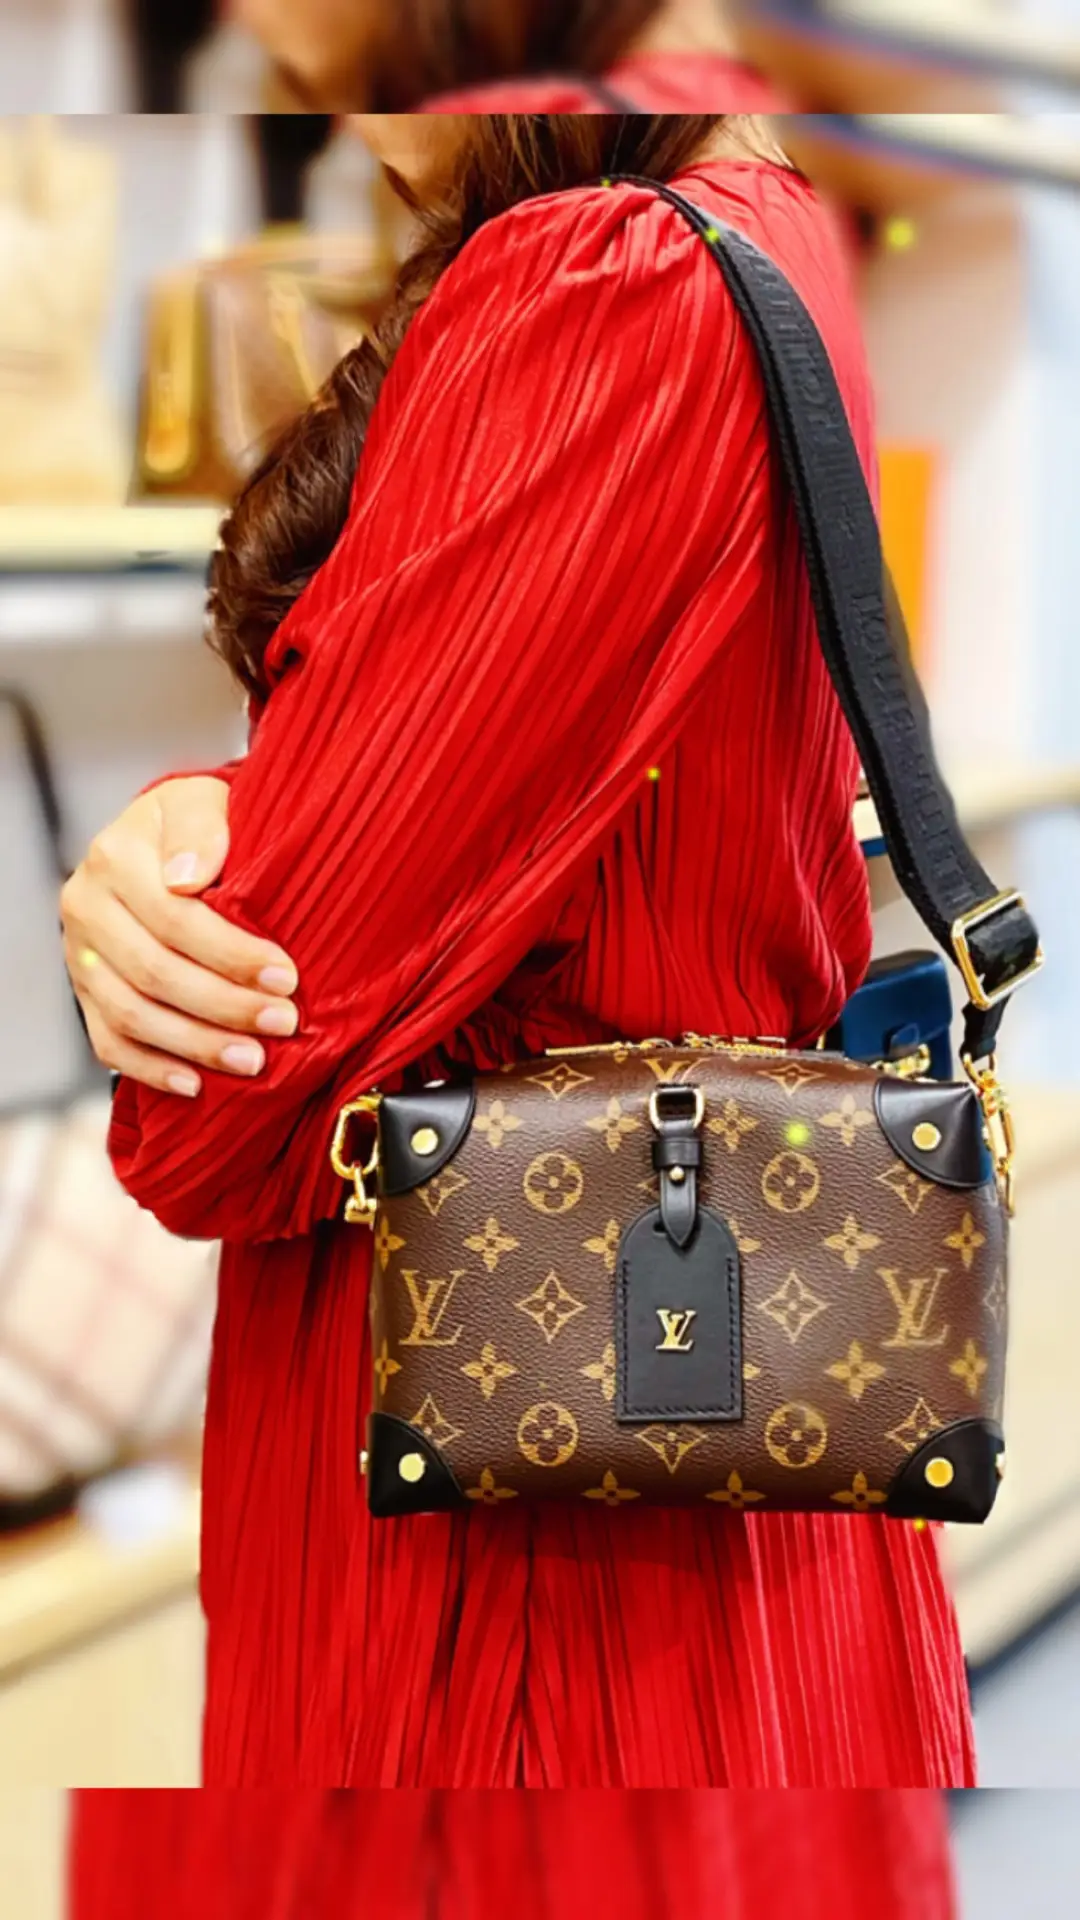 Louis Vuitton Petite Malle Souple Pros and Cons. What Fits 